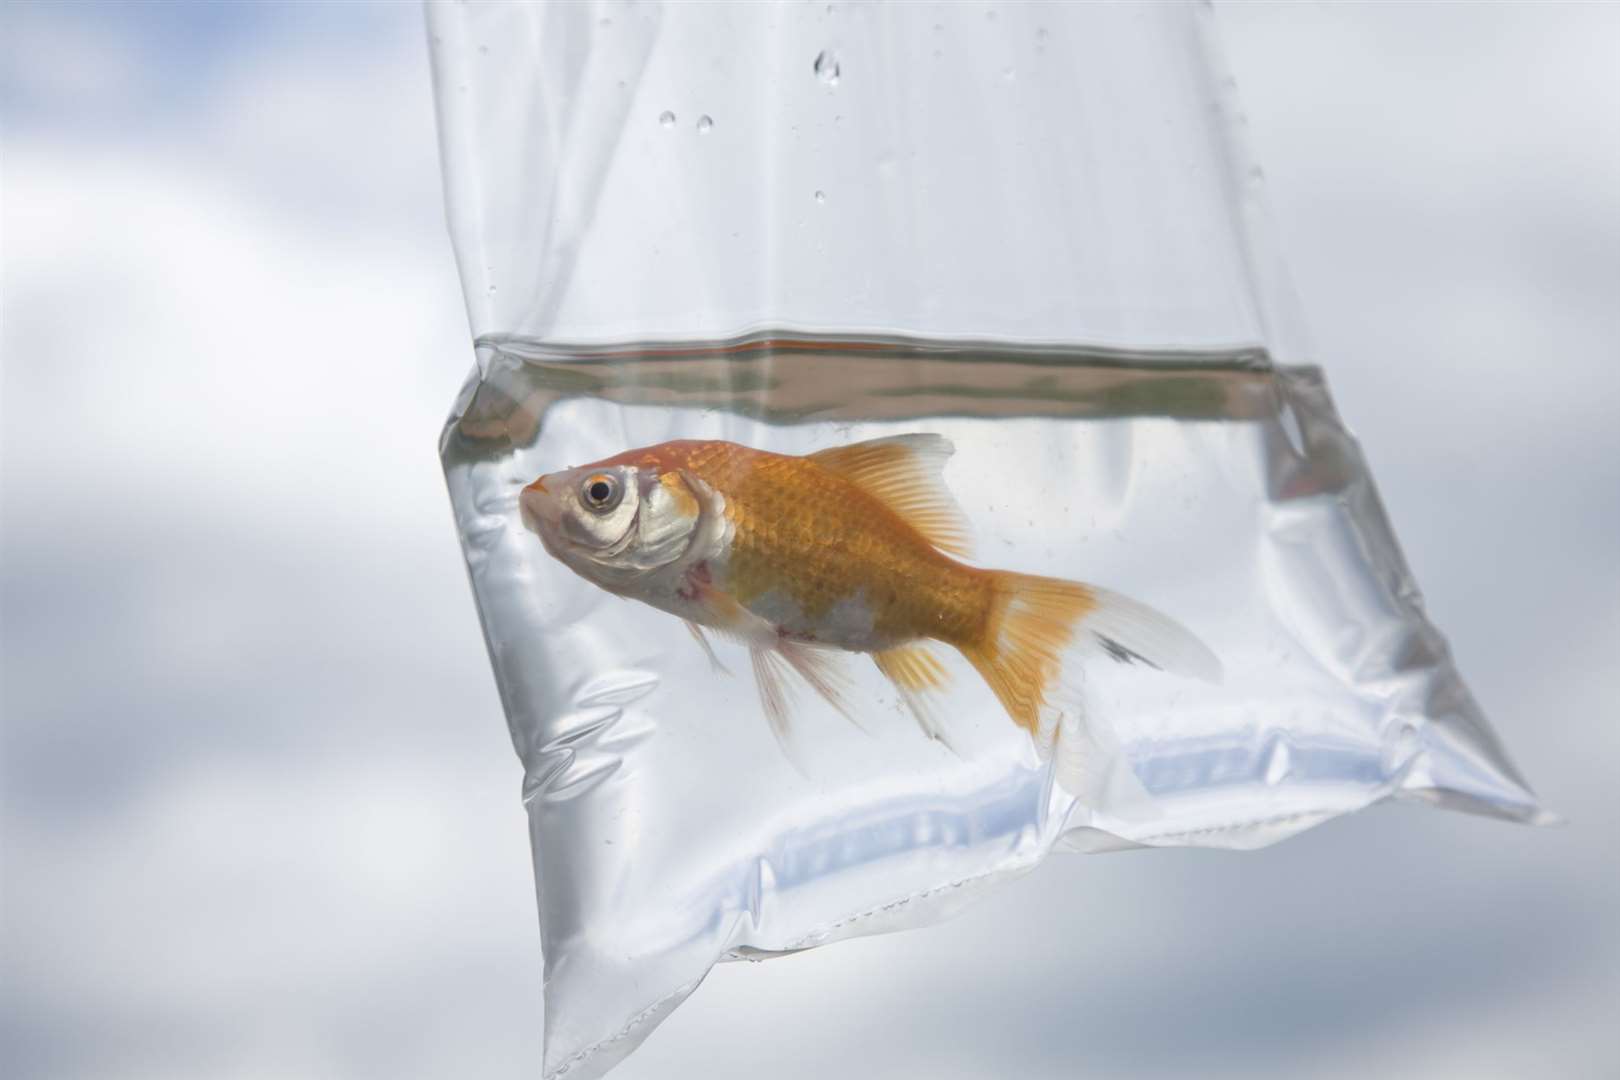 Giving away goldfish in a bag is not illegal in England or Wales